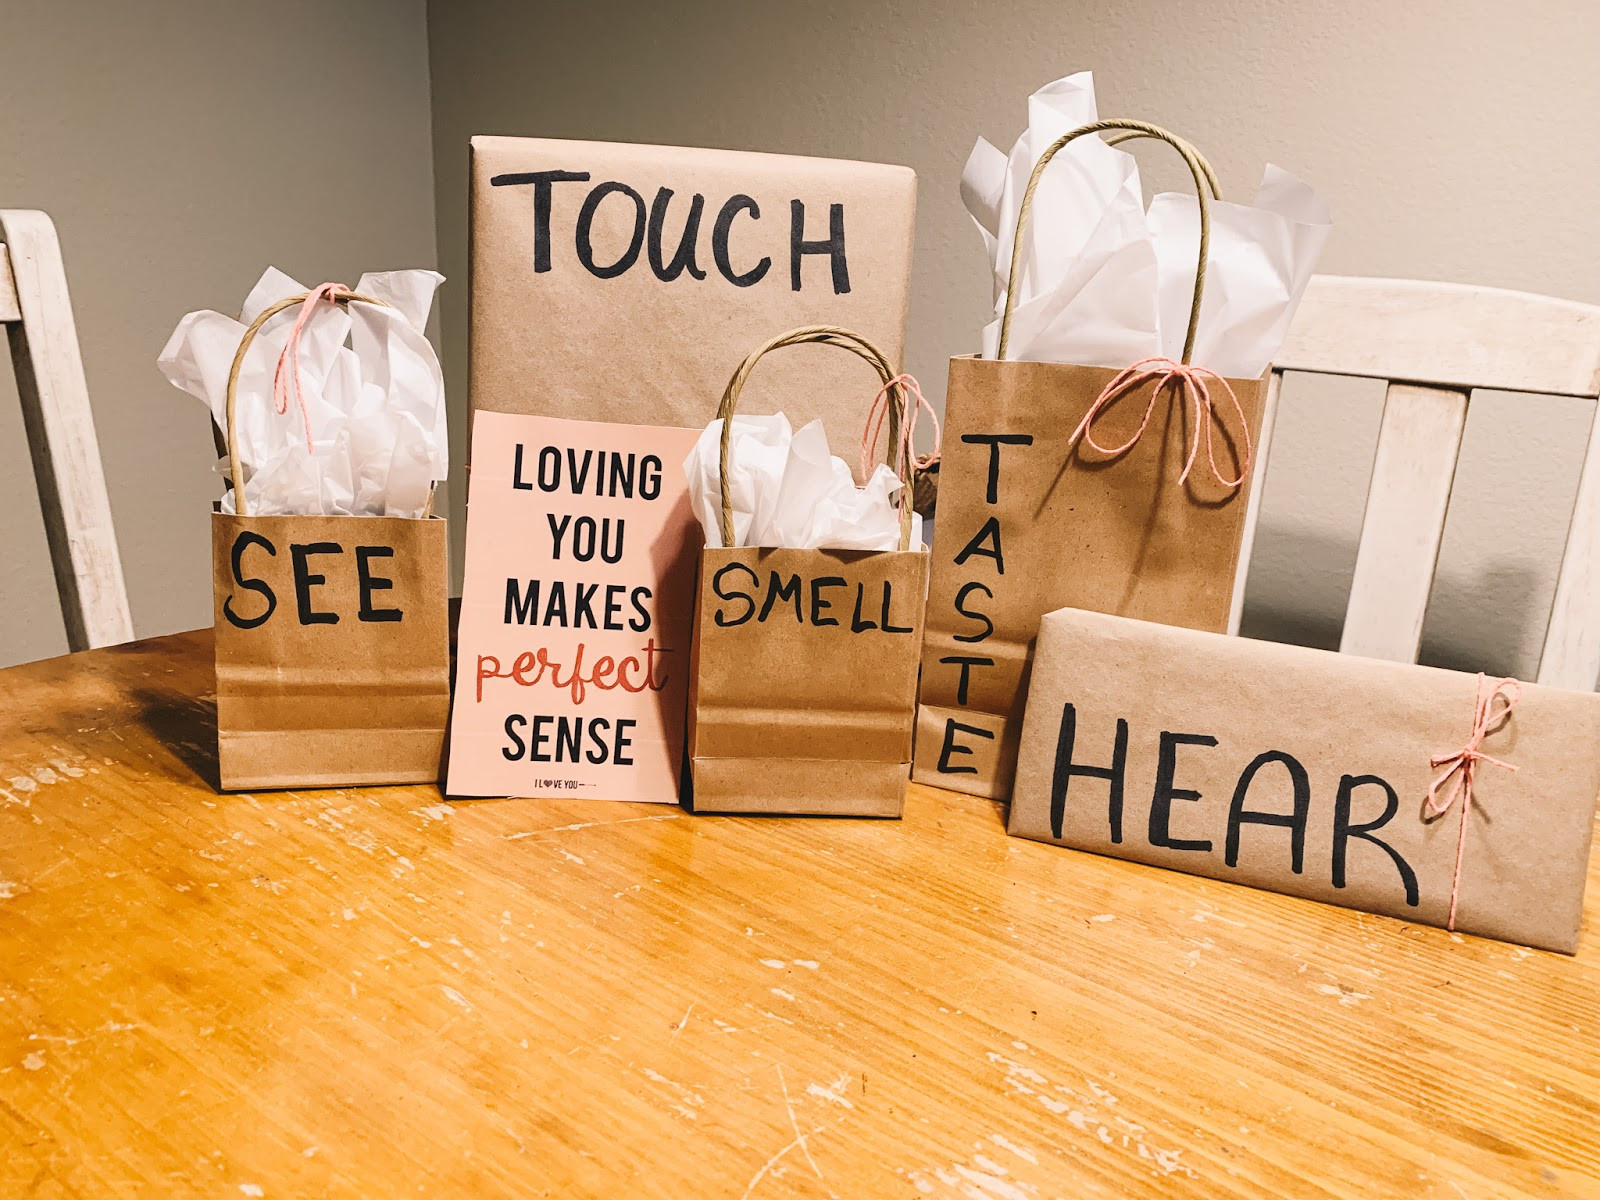 Ideas For Valentines Day For Him
 The 5 Senses Valentines Day Gift Ideas for Him & Her